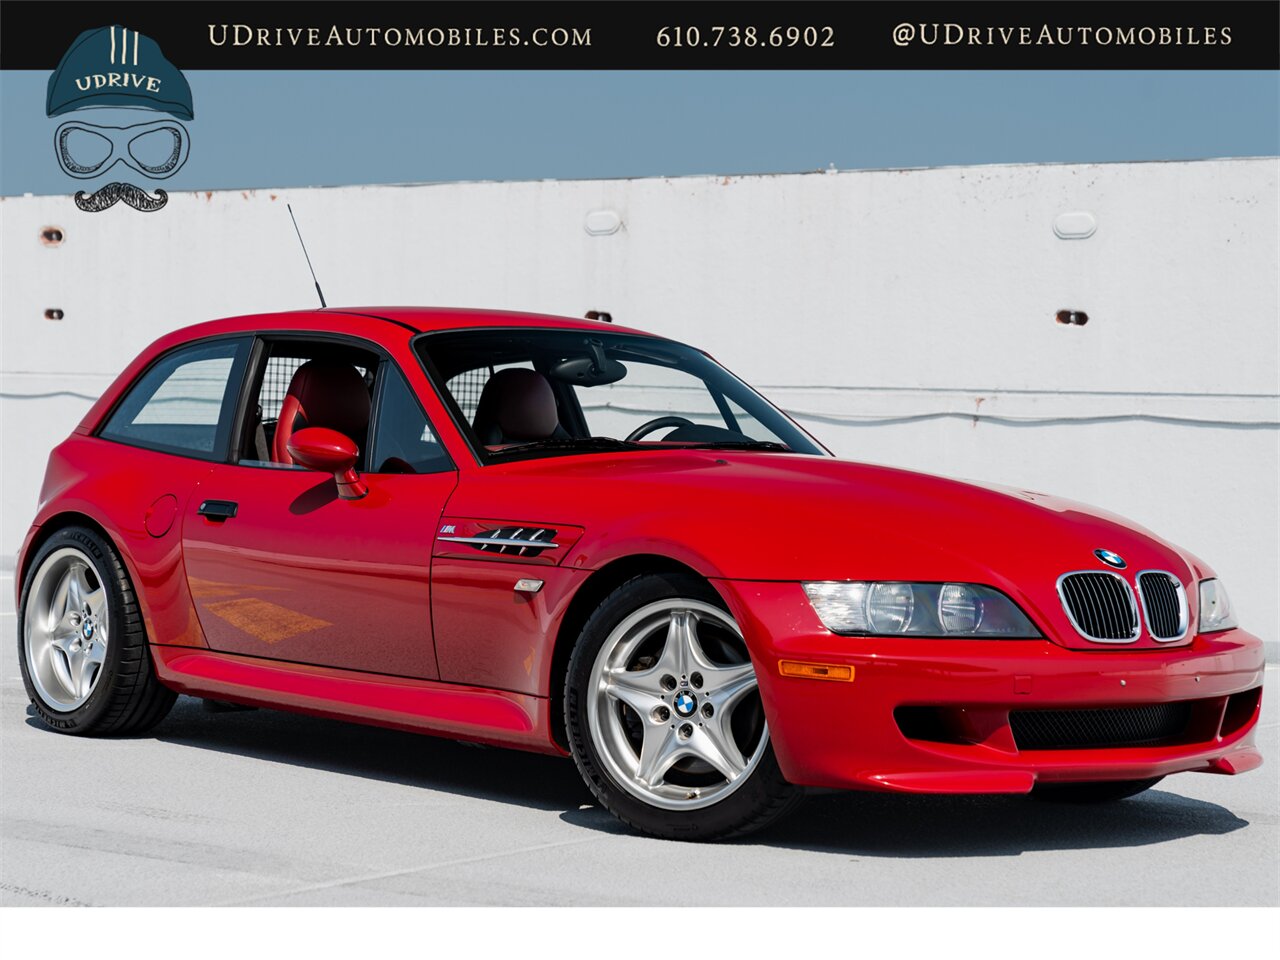 2000 BMW Z3 M  Coupe 25k Miles  Sunroof Delete $4k Recent Service - Photo 3 - West Chester, PA 19382